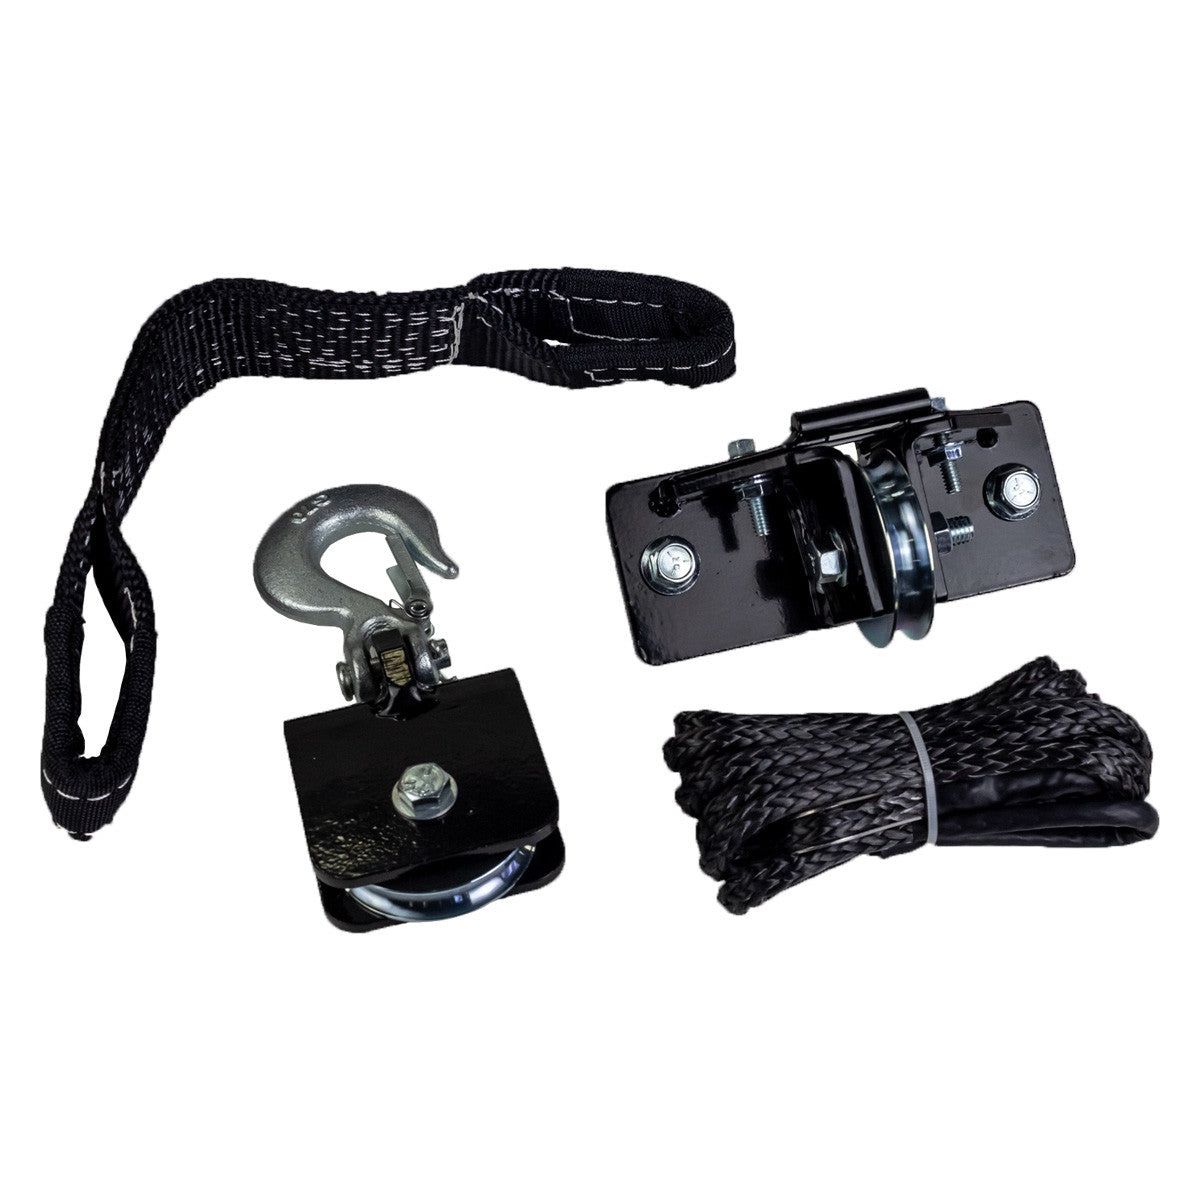 Plow lift strap kit: for a winch